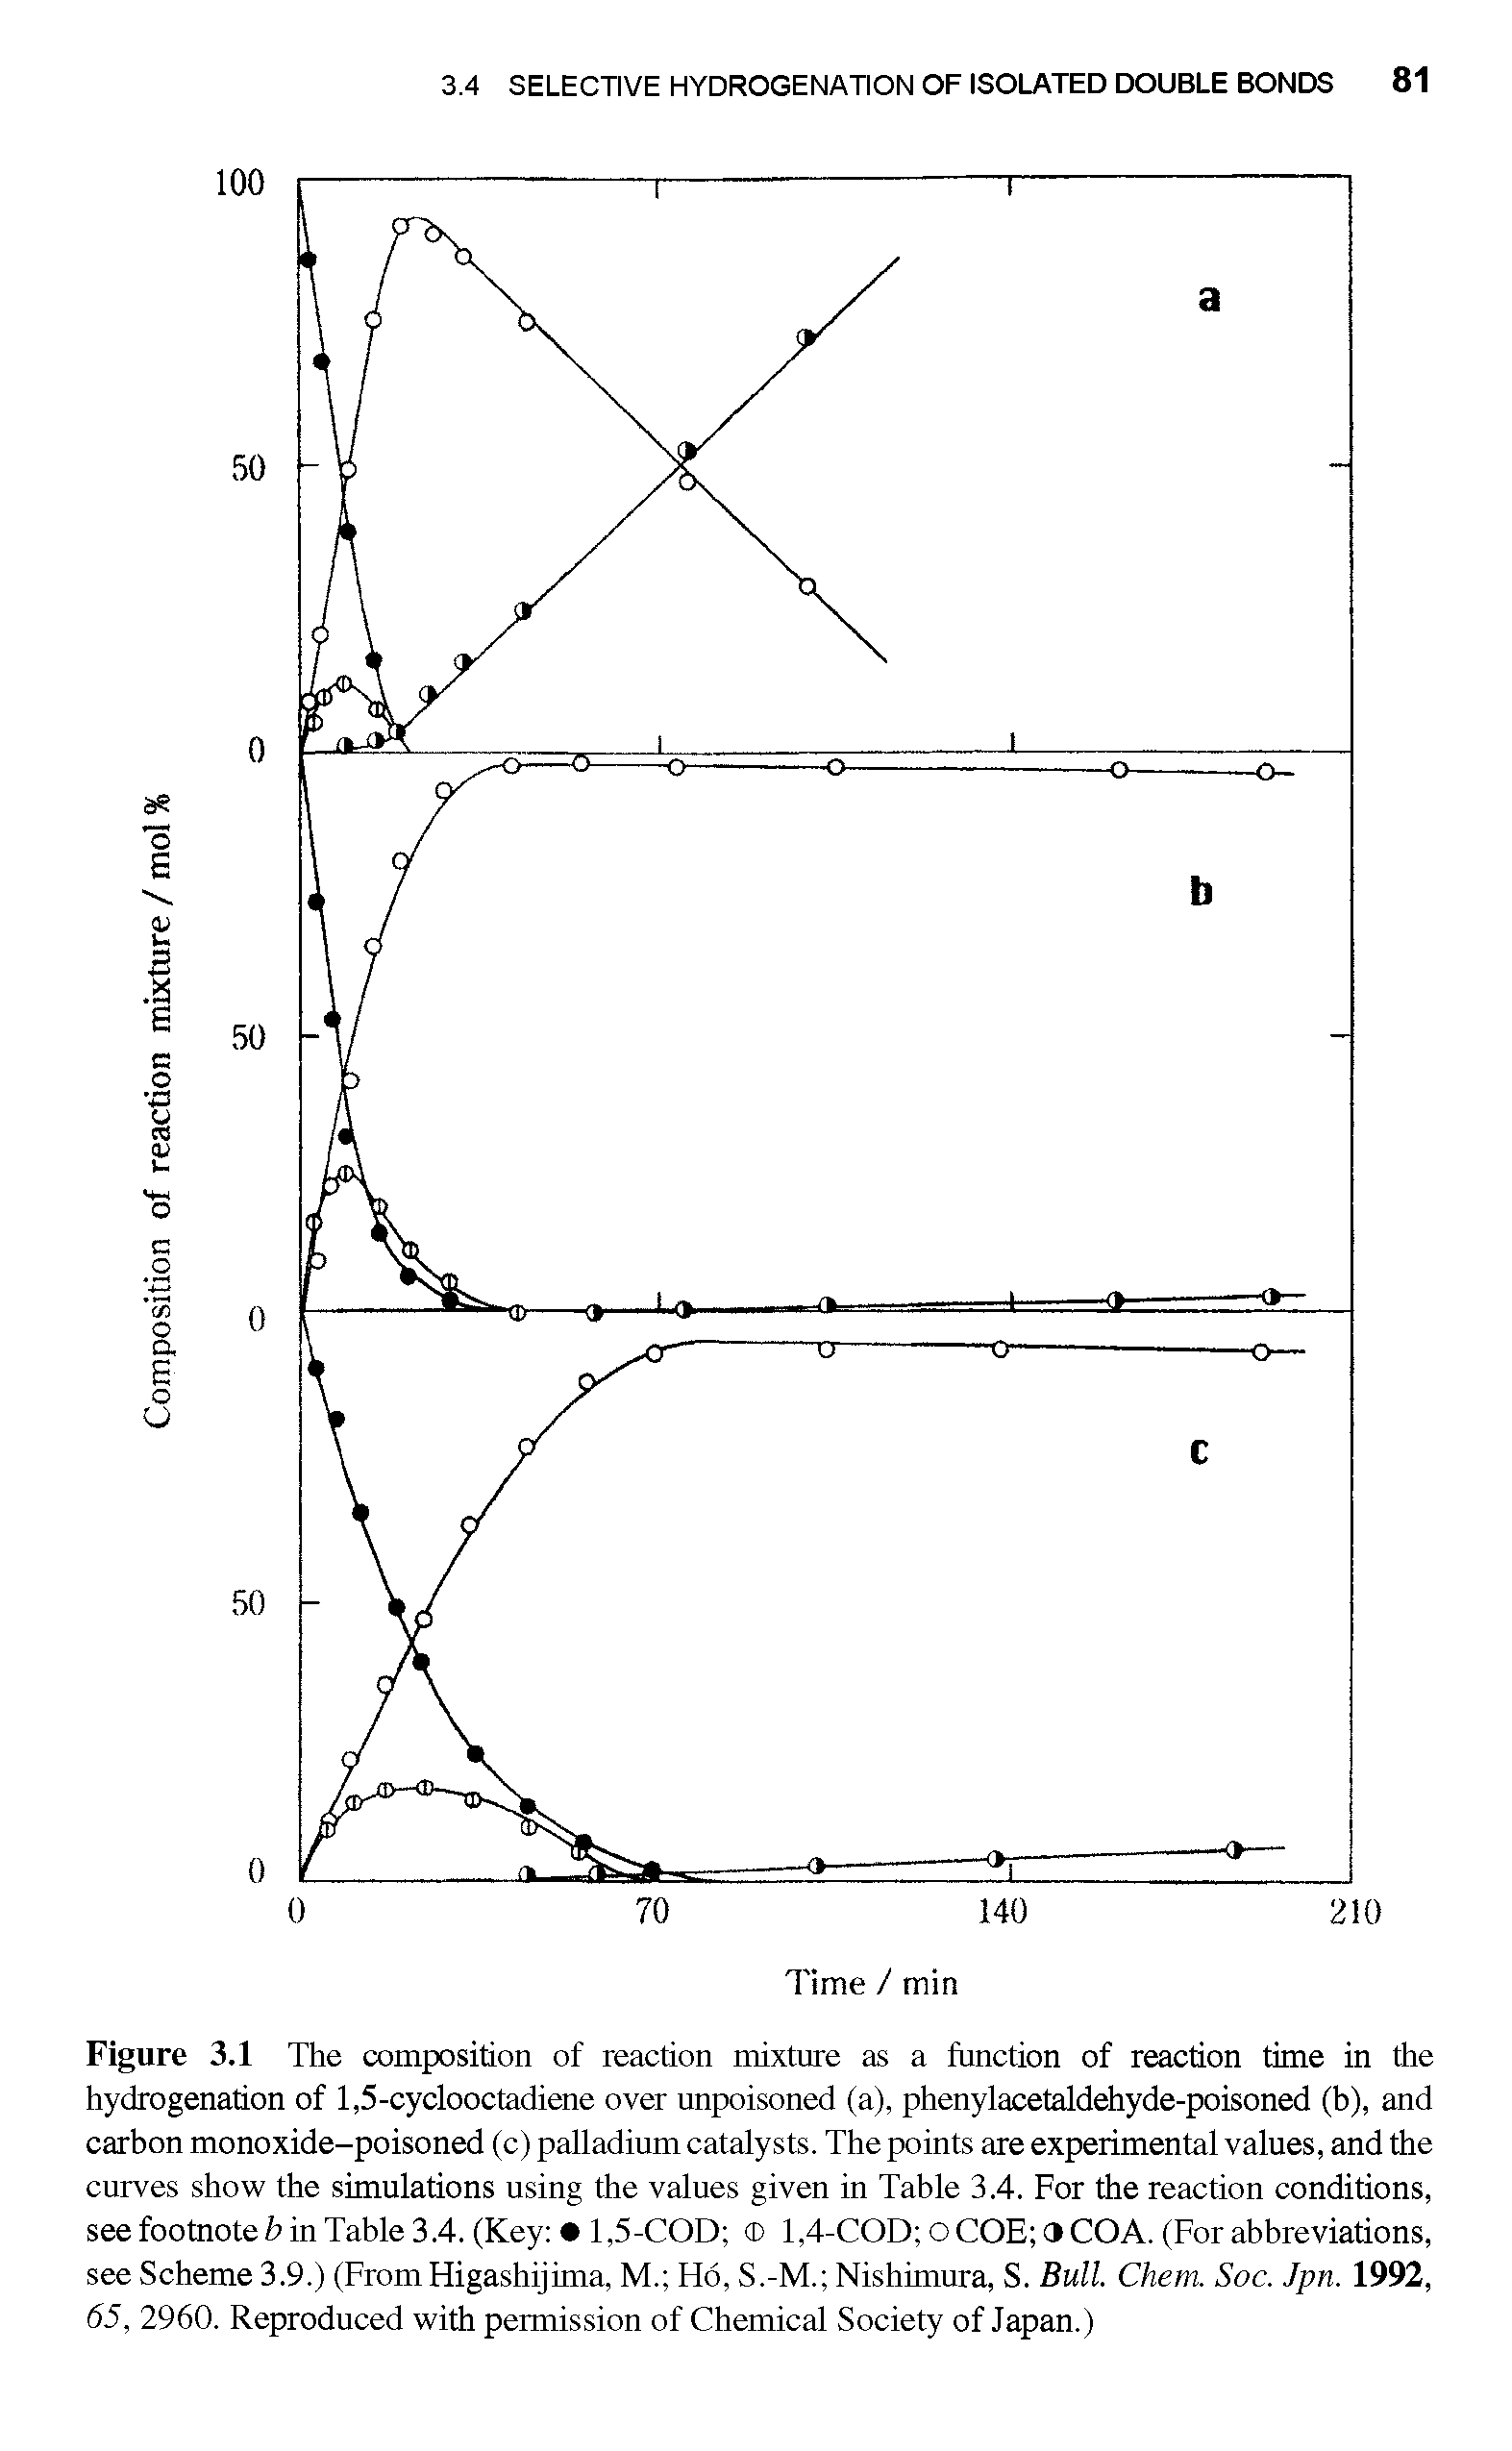 Figure 3.1 The composition of reaction mixture as a function of reaction time in the hydrogenation of 1,5-cyclooctadiene over unpoisoned (a), phenylacetaldehyde-poisoned (b), and carbon monoxide-poisoned (c) palladium catalysts. The points are experimental values, and the curves show the simulations using the values given in Table 3.4. For the reaction conditions, see footnote b in Table 3.4. (Key 1,5-COD 1,4-COD O COE 9 COA. (For abbreviations, see Scheme 3.9.) (FromHigashijima, M. Ho, S.-M. Nishimura, S. Bull. Chem. Soc. Jpn. 1992, 65, 2960. Reproduced with permission of Chemical Society of Japan.)...